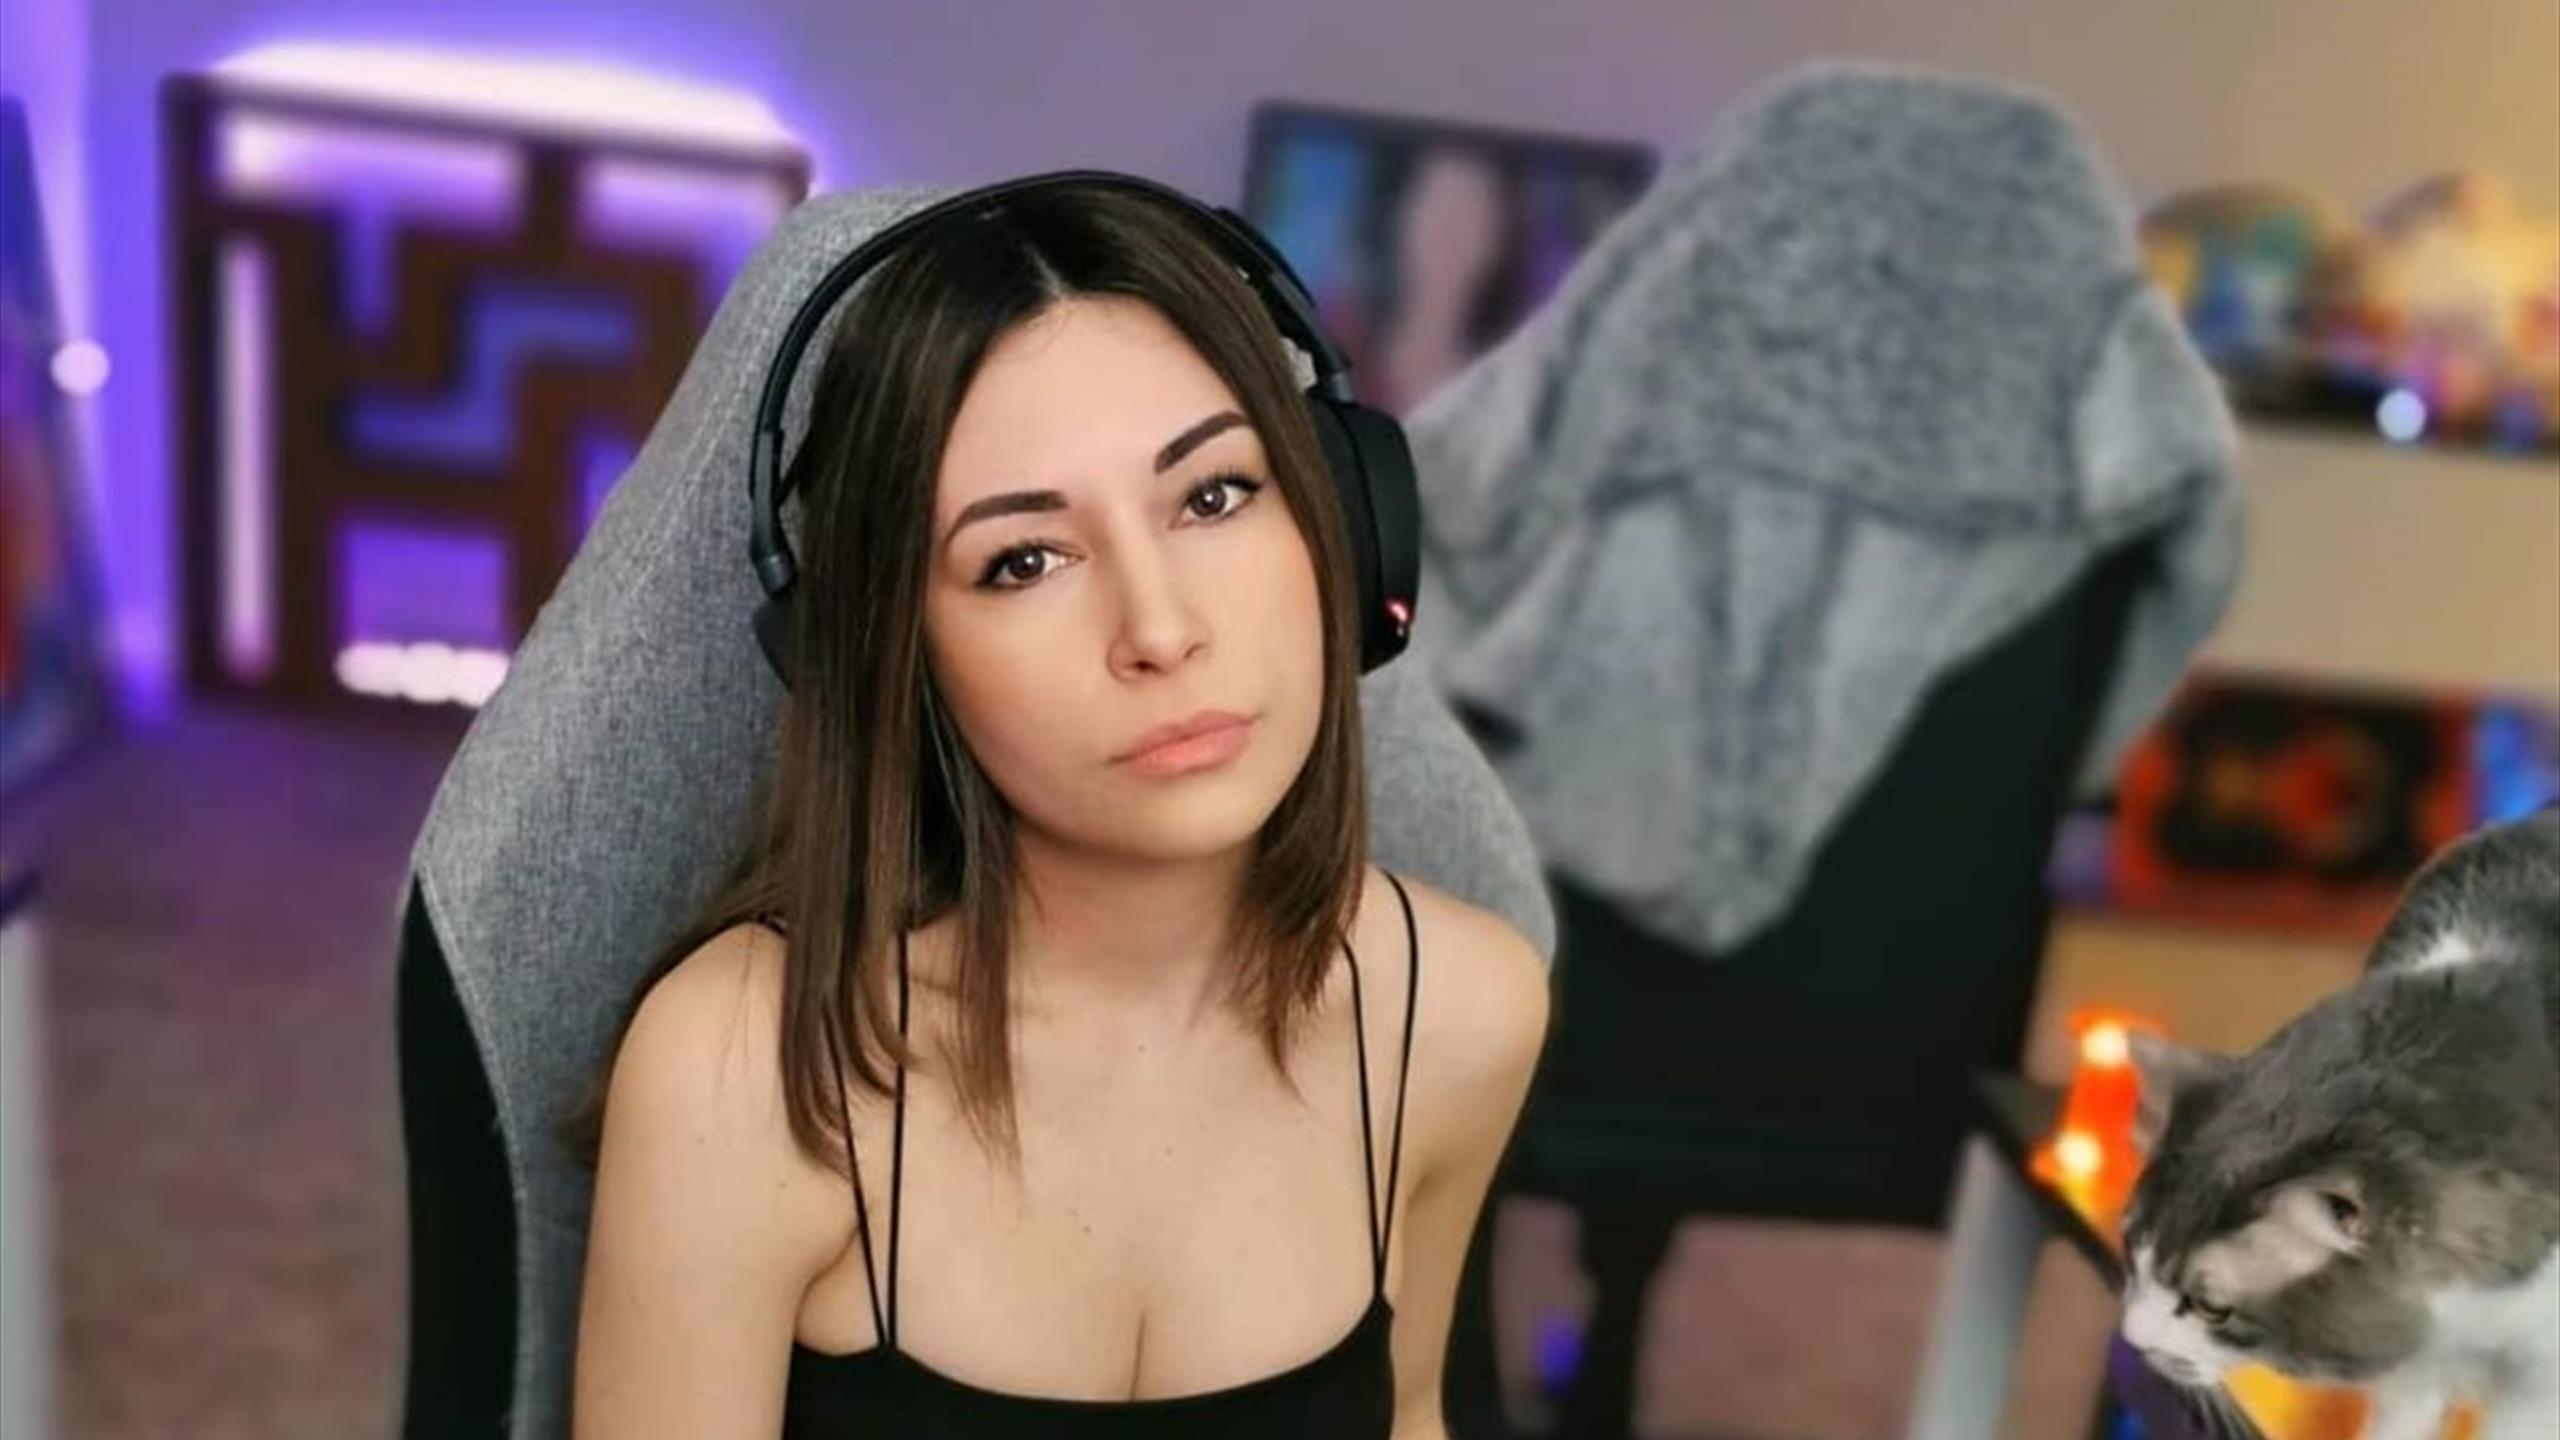 Twitch Streamer Shows Breasts photo 27